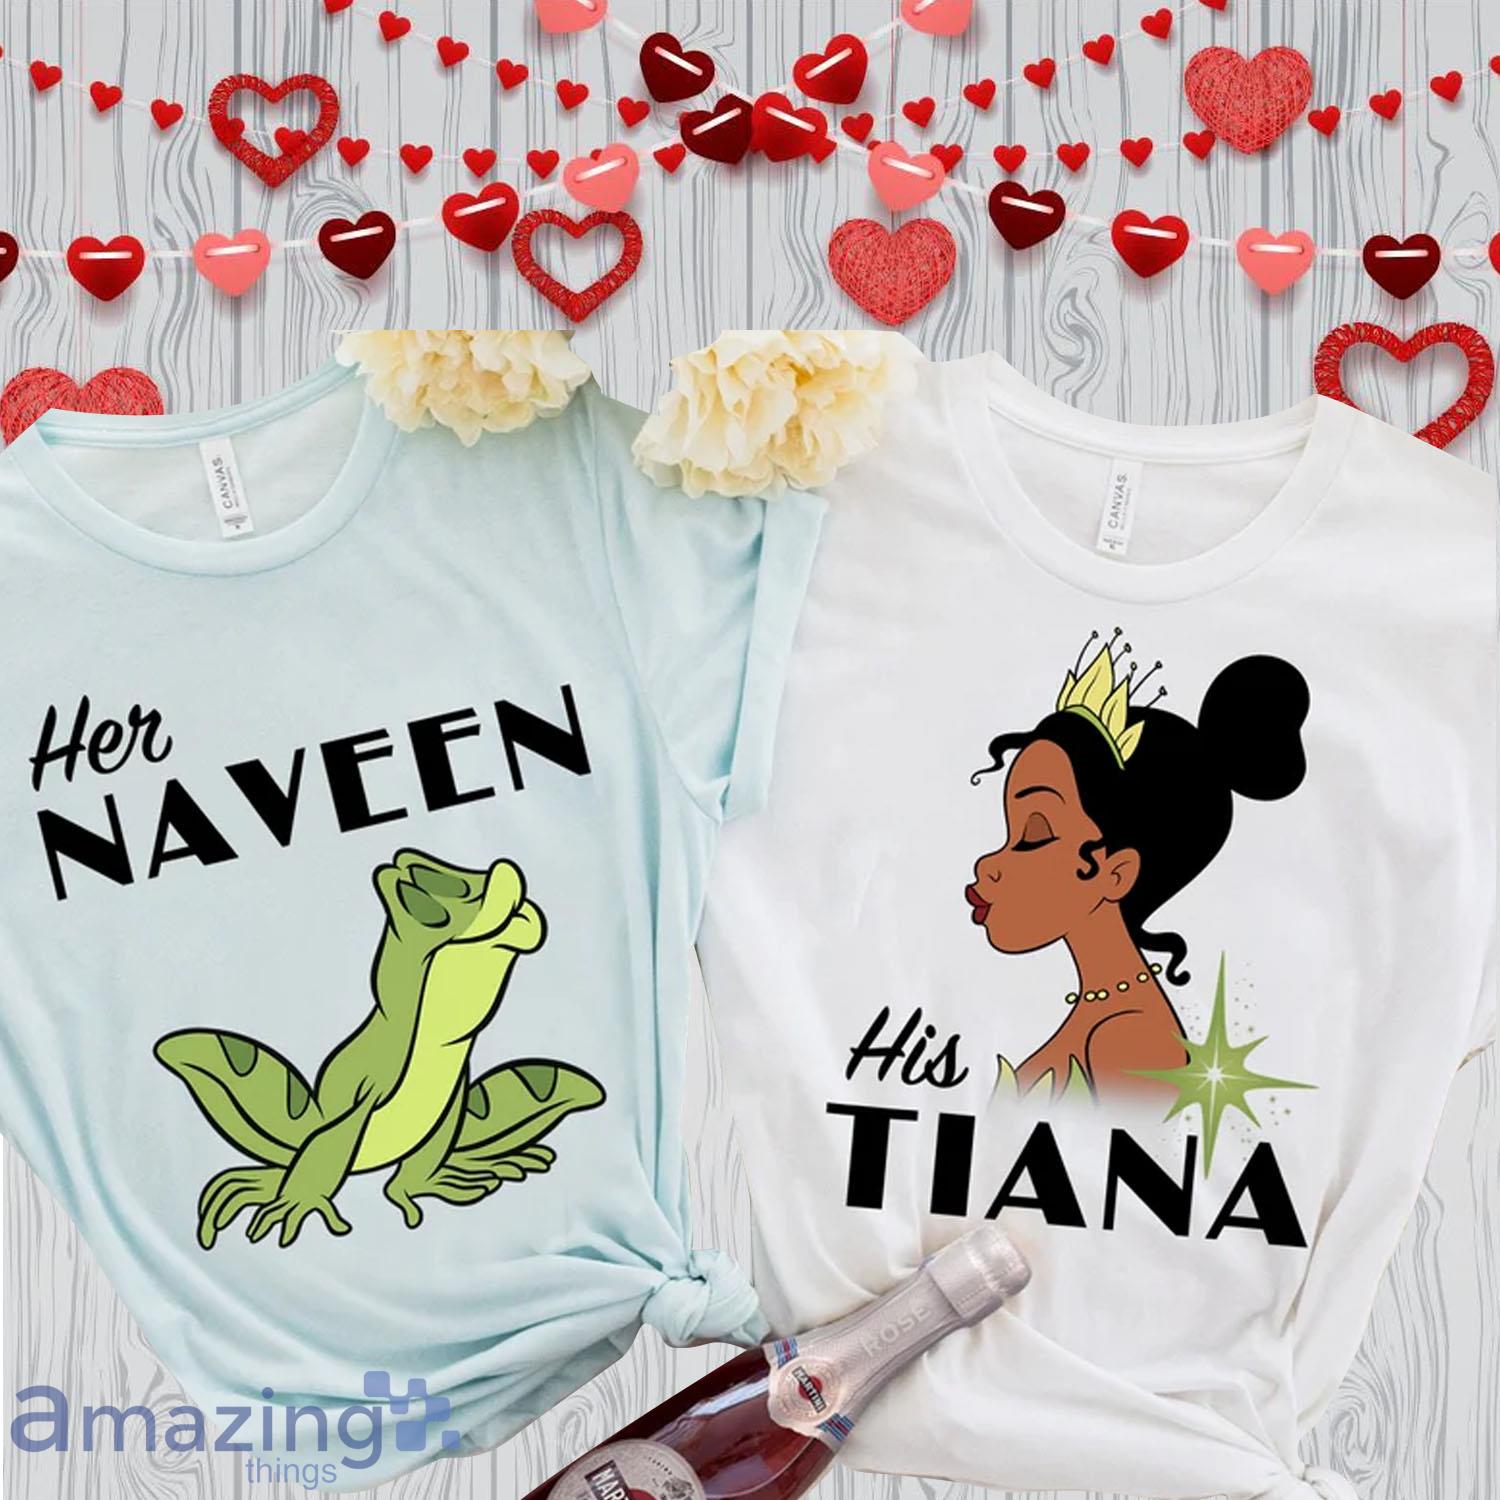 Disney Princess And The Frog Her Naveen And His Tiana Valentine's Day Matching Couple Shirt - Disney Princess And The Frog Her Naveen And His Tiana Valentine's Day Matching Couple Shirt